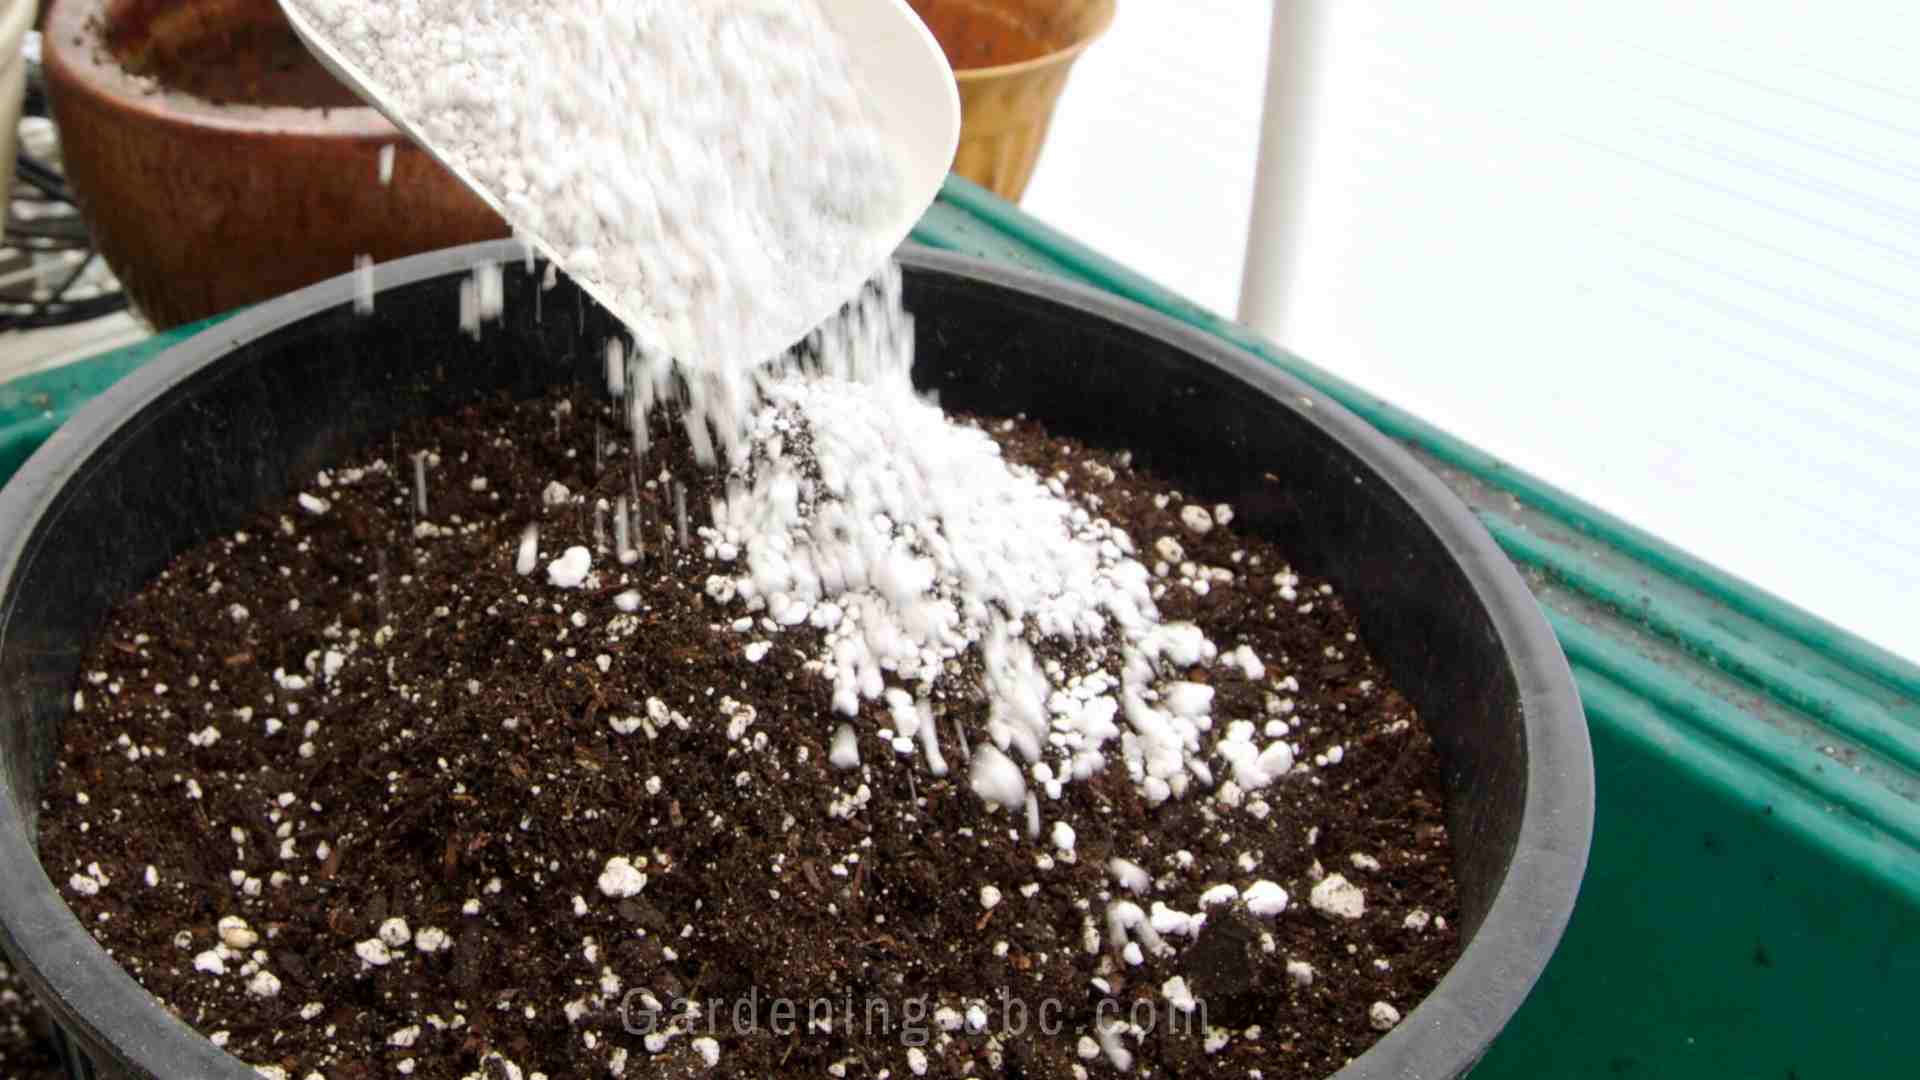 Is perlite good for succulents